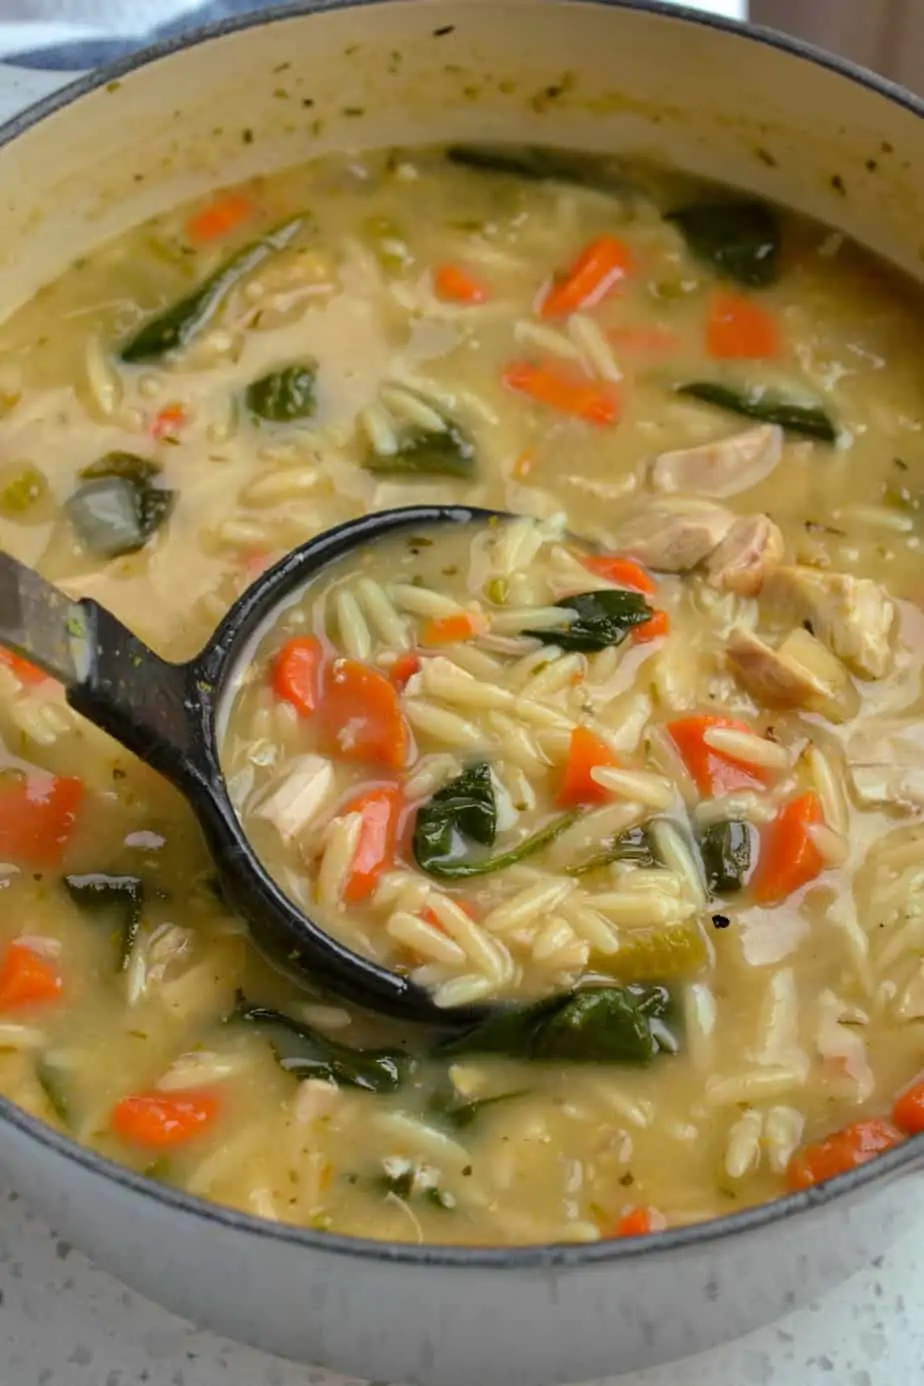 Creamy soup with chicken and orzo